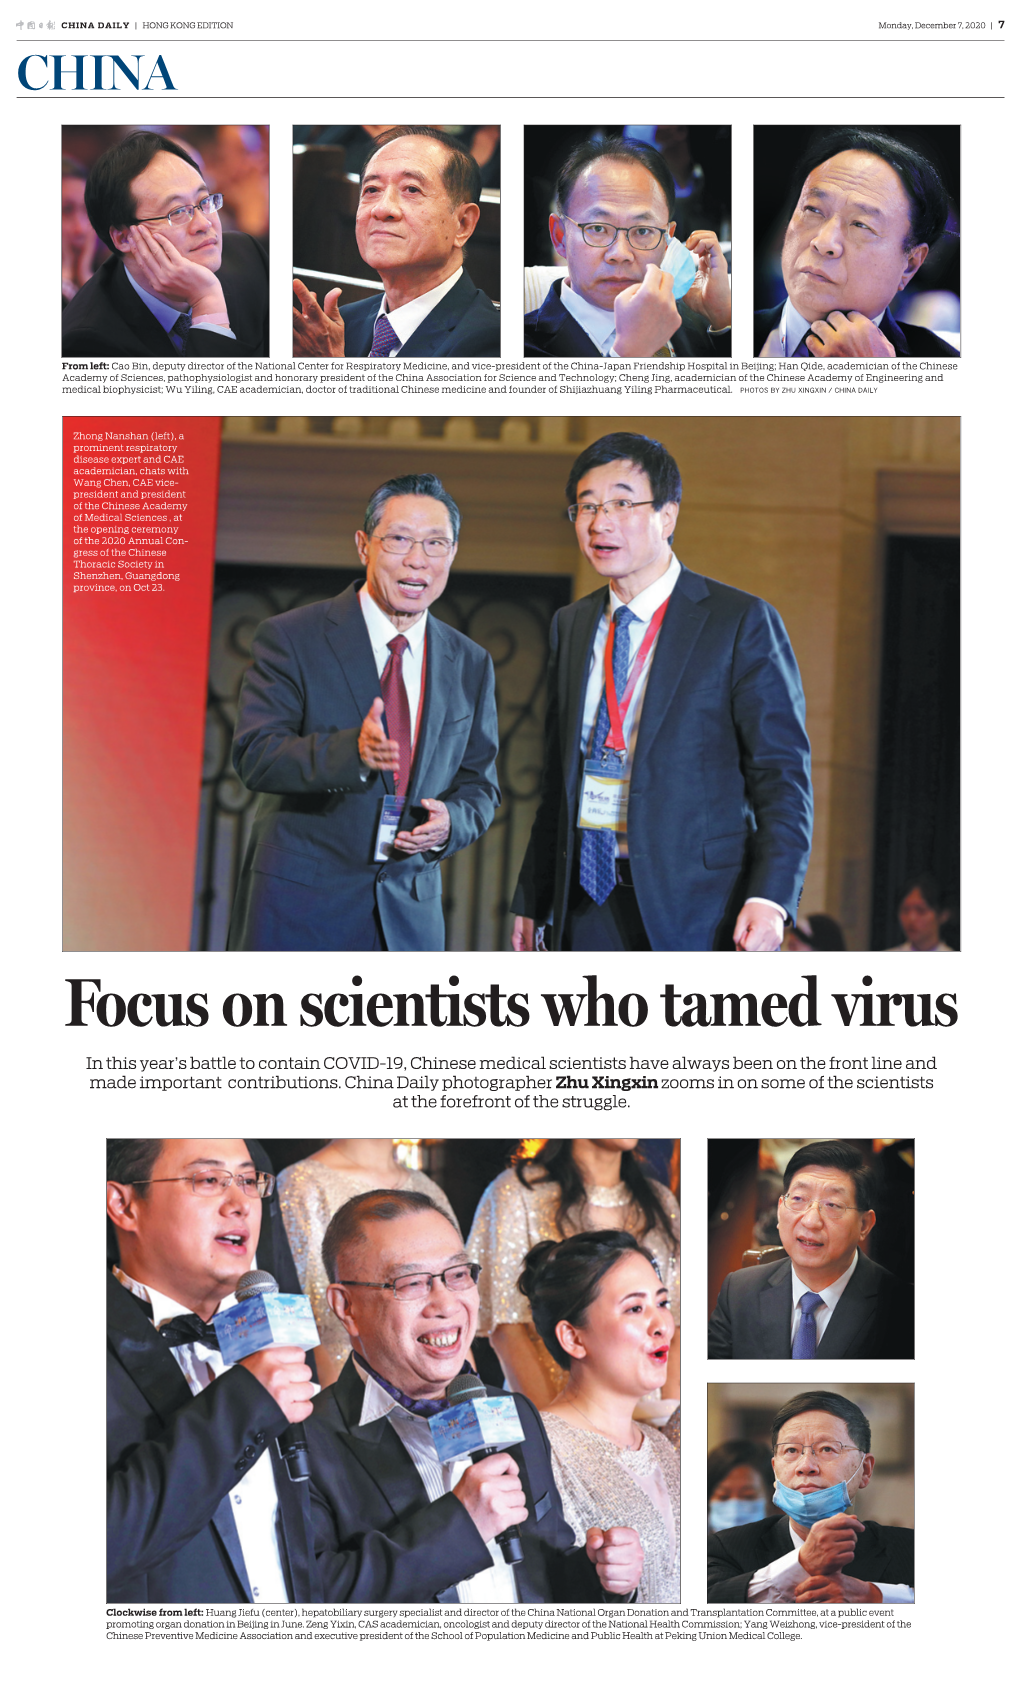 Focus on Scientists Who Tamed Virus